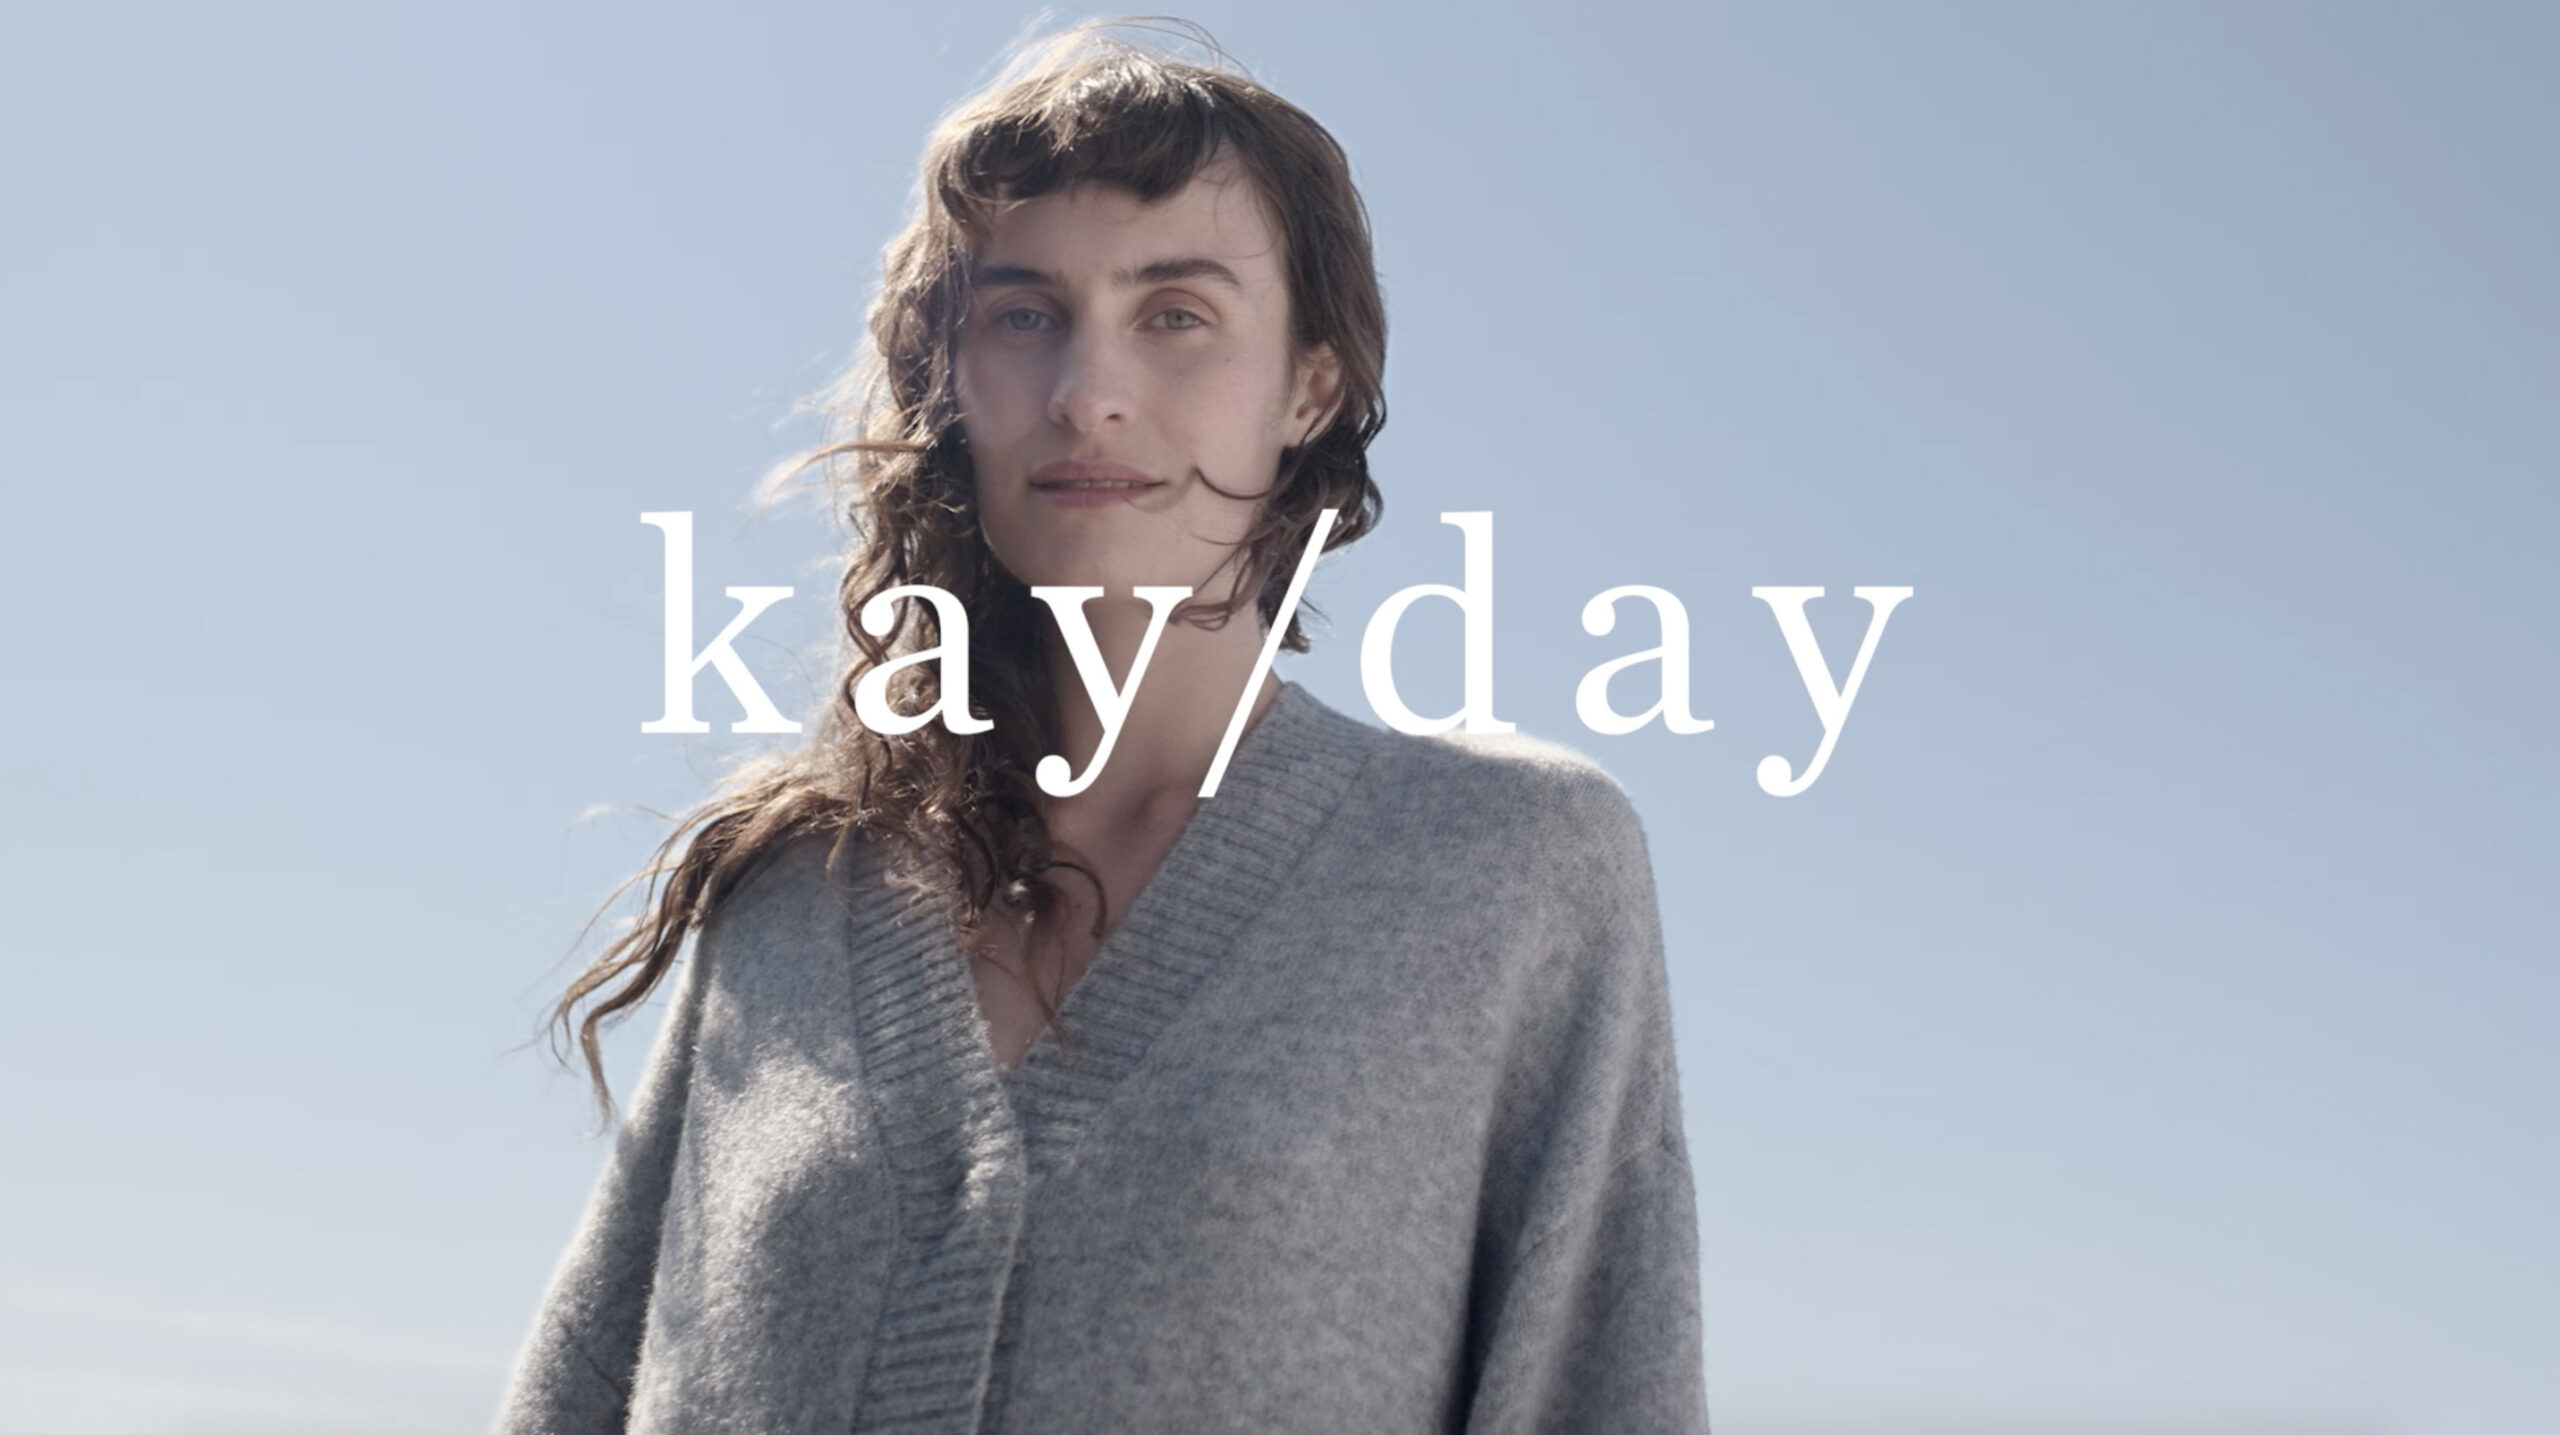 Life is: Kay/day